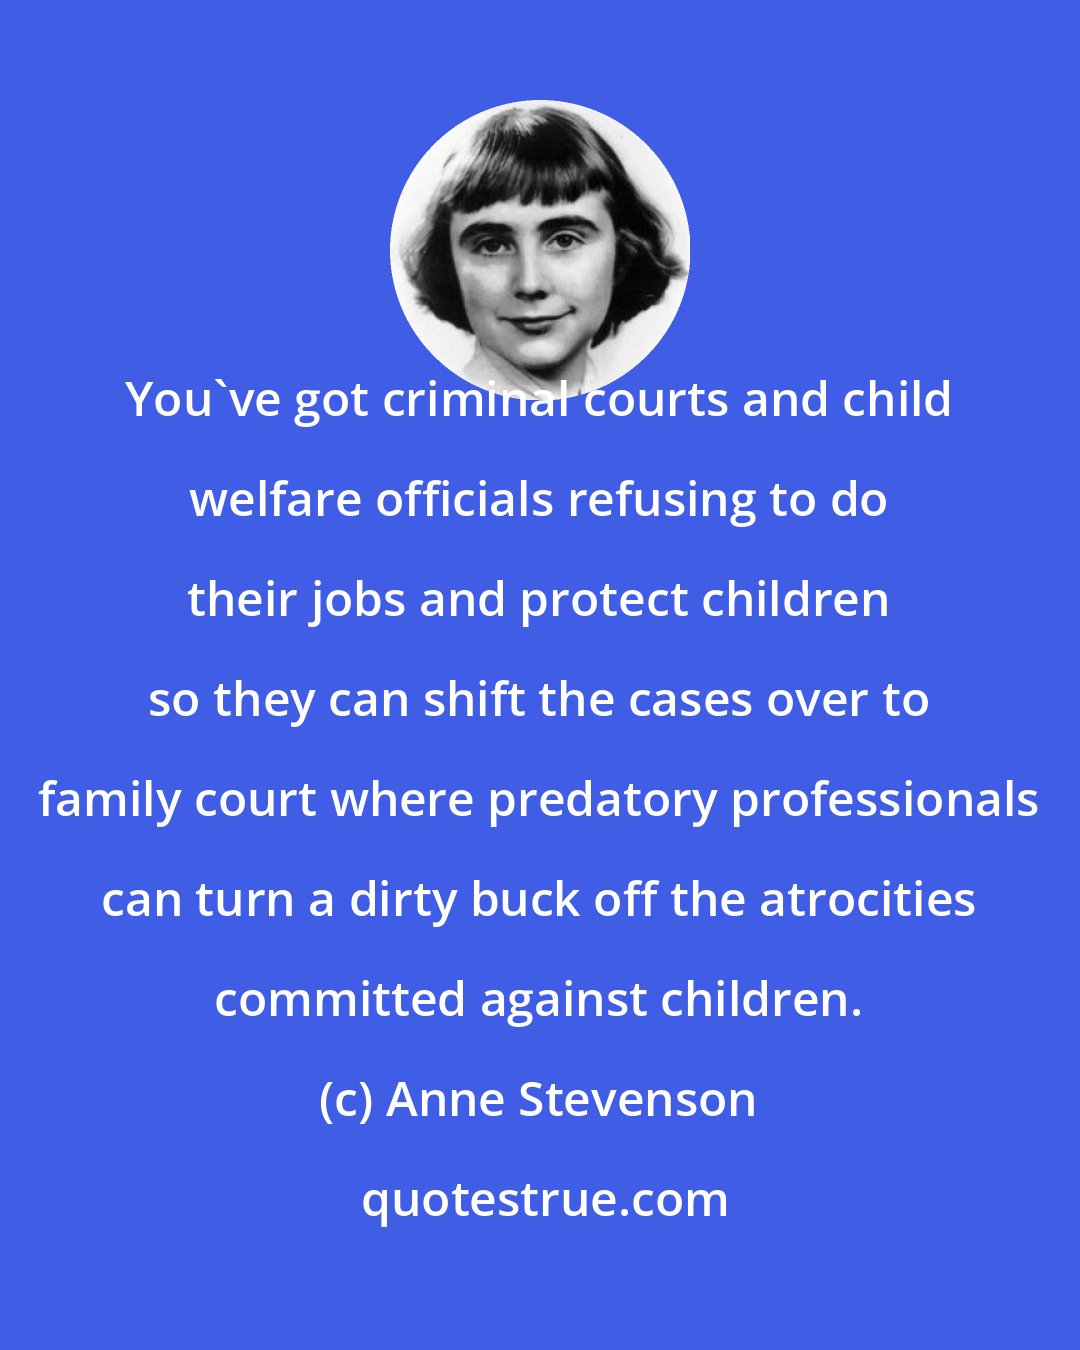 Anne Stevenson: You've got criminal courts and child welfare officials refusing to do their jobs and protect children so they can shift the cases over to family court where predatory professionals can turn a dirty buck off the atrocities committed against children.